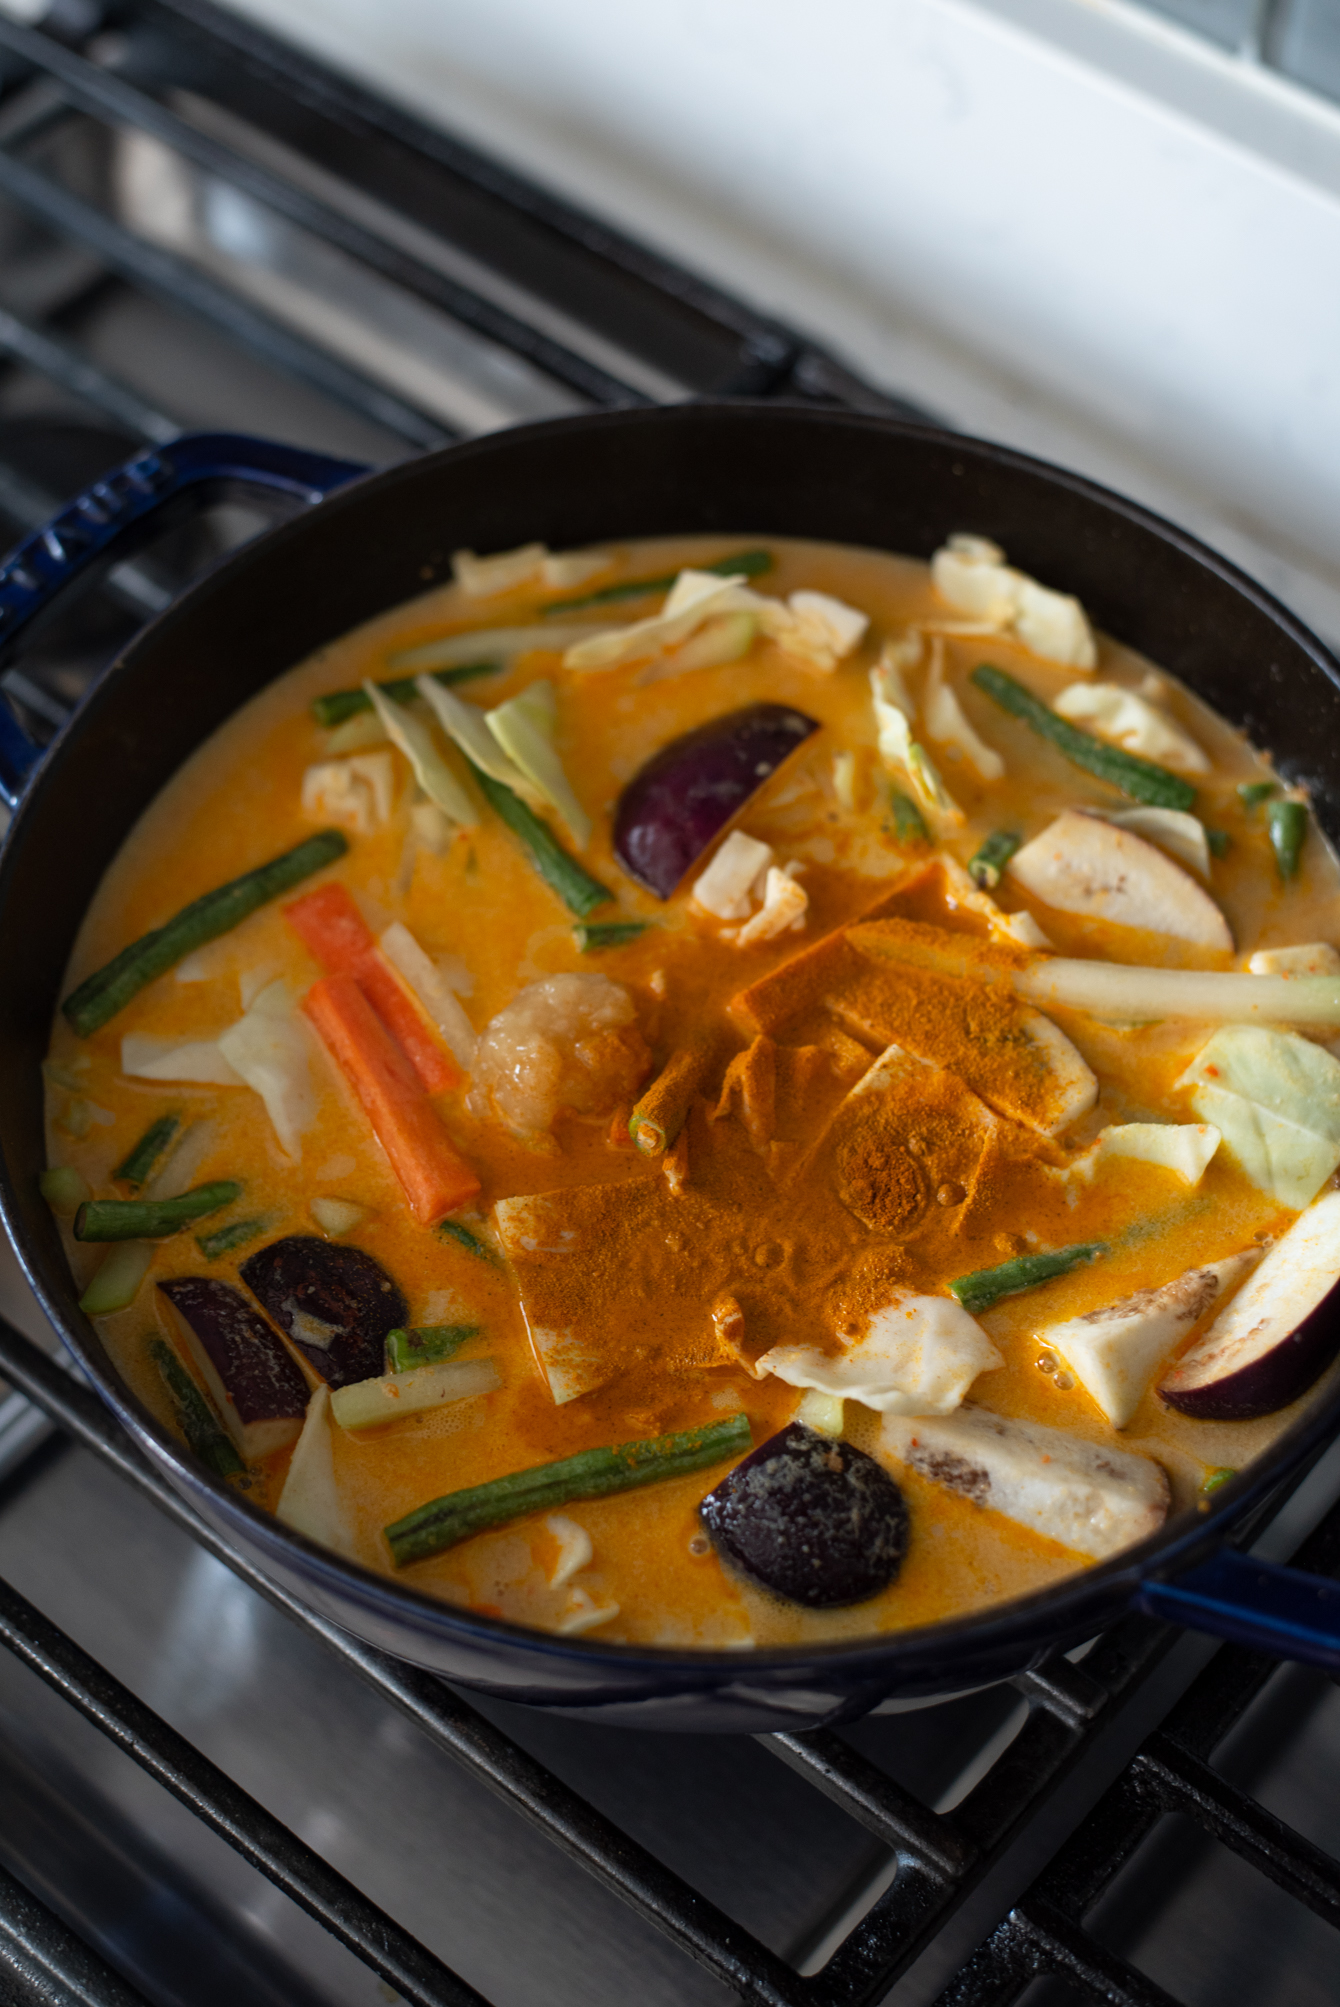 Vegetable curry with coconut milk uses tumeric powder to add flavor and color